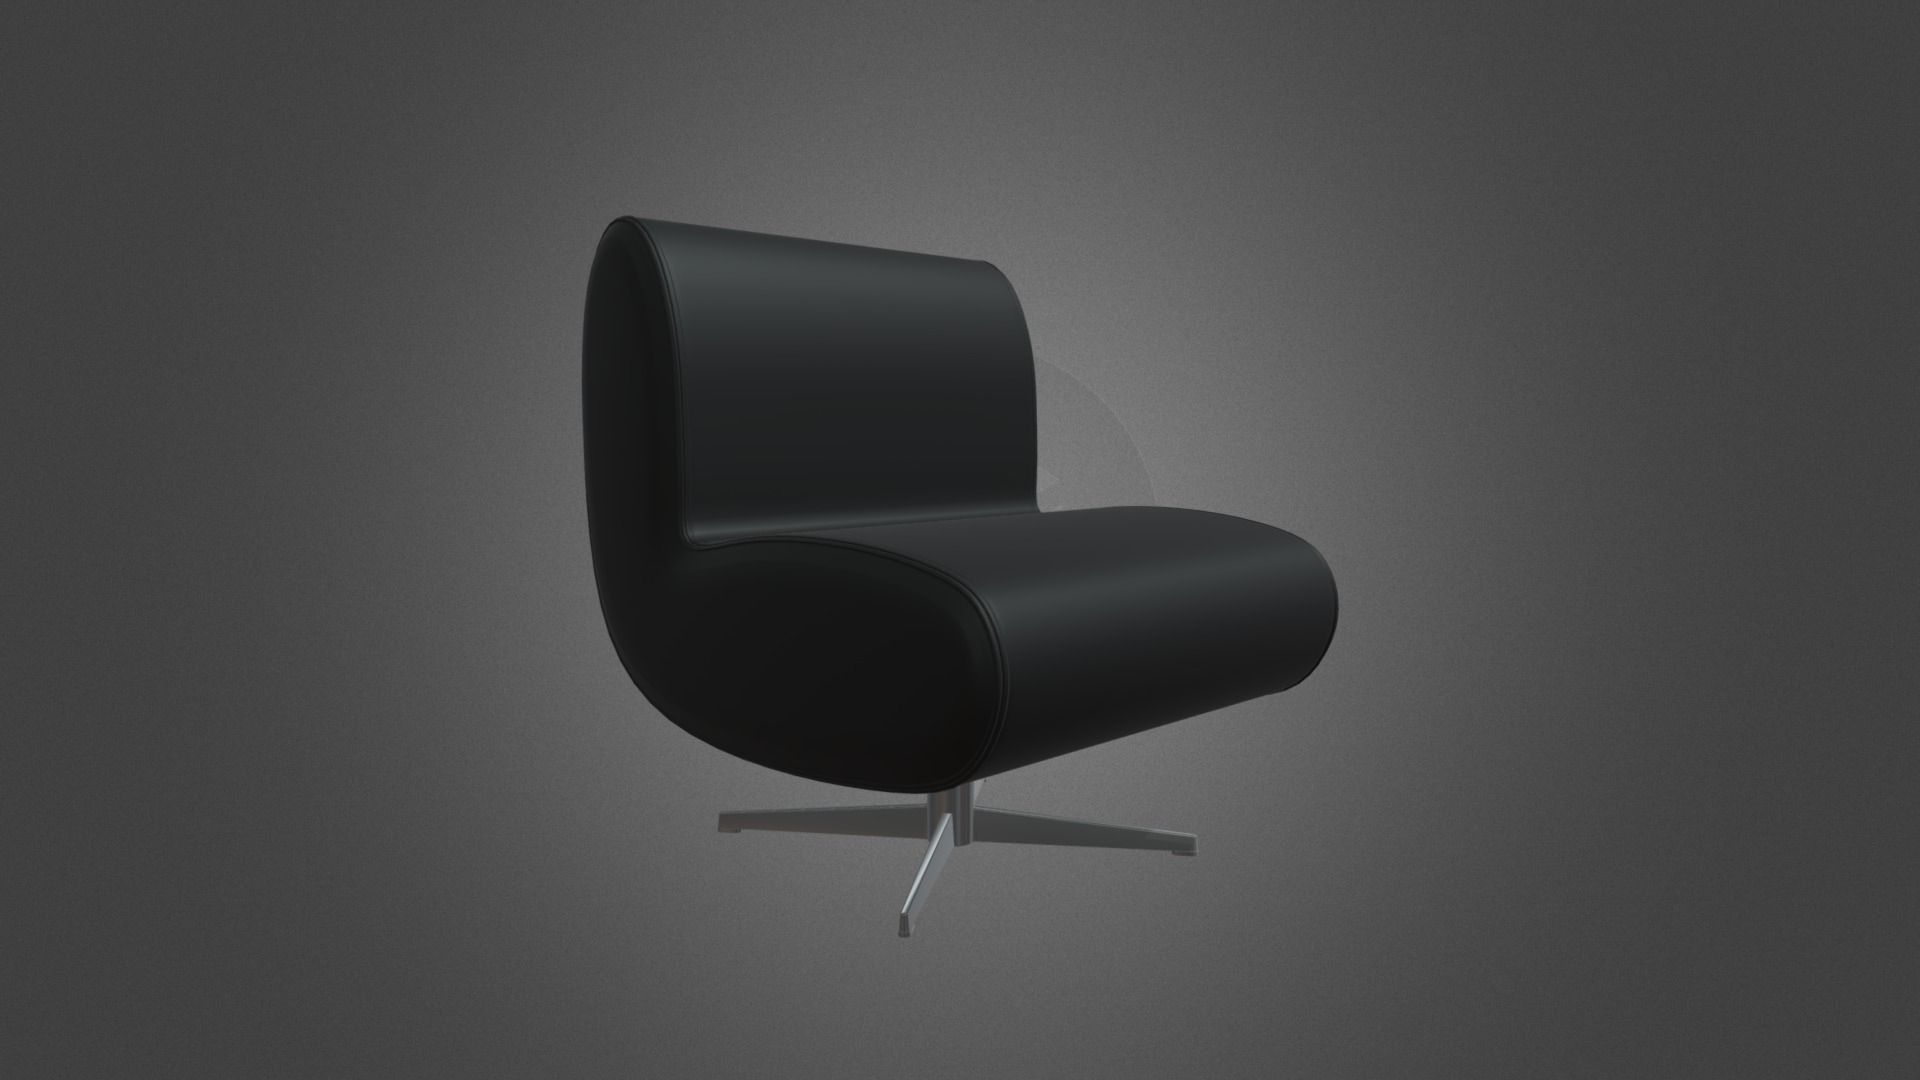 3D model Angel Halo Chair No Arms Hire - This is a 3D model of the Angel Halo Chair No Arms Hire. The 3D model is about a black computer mouse.